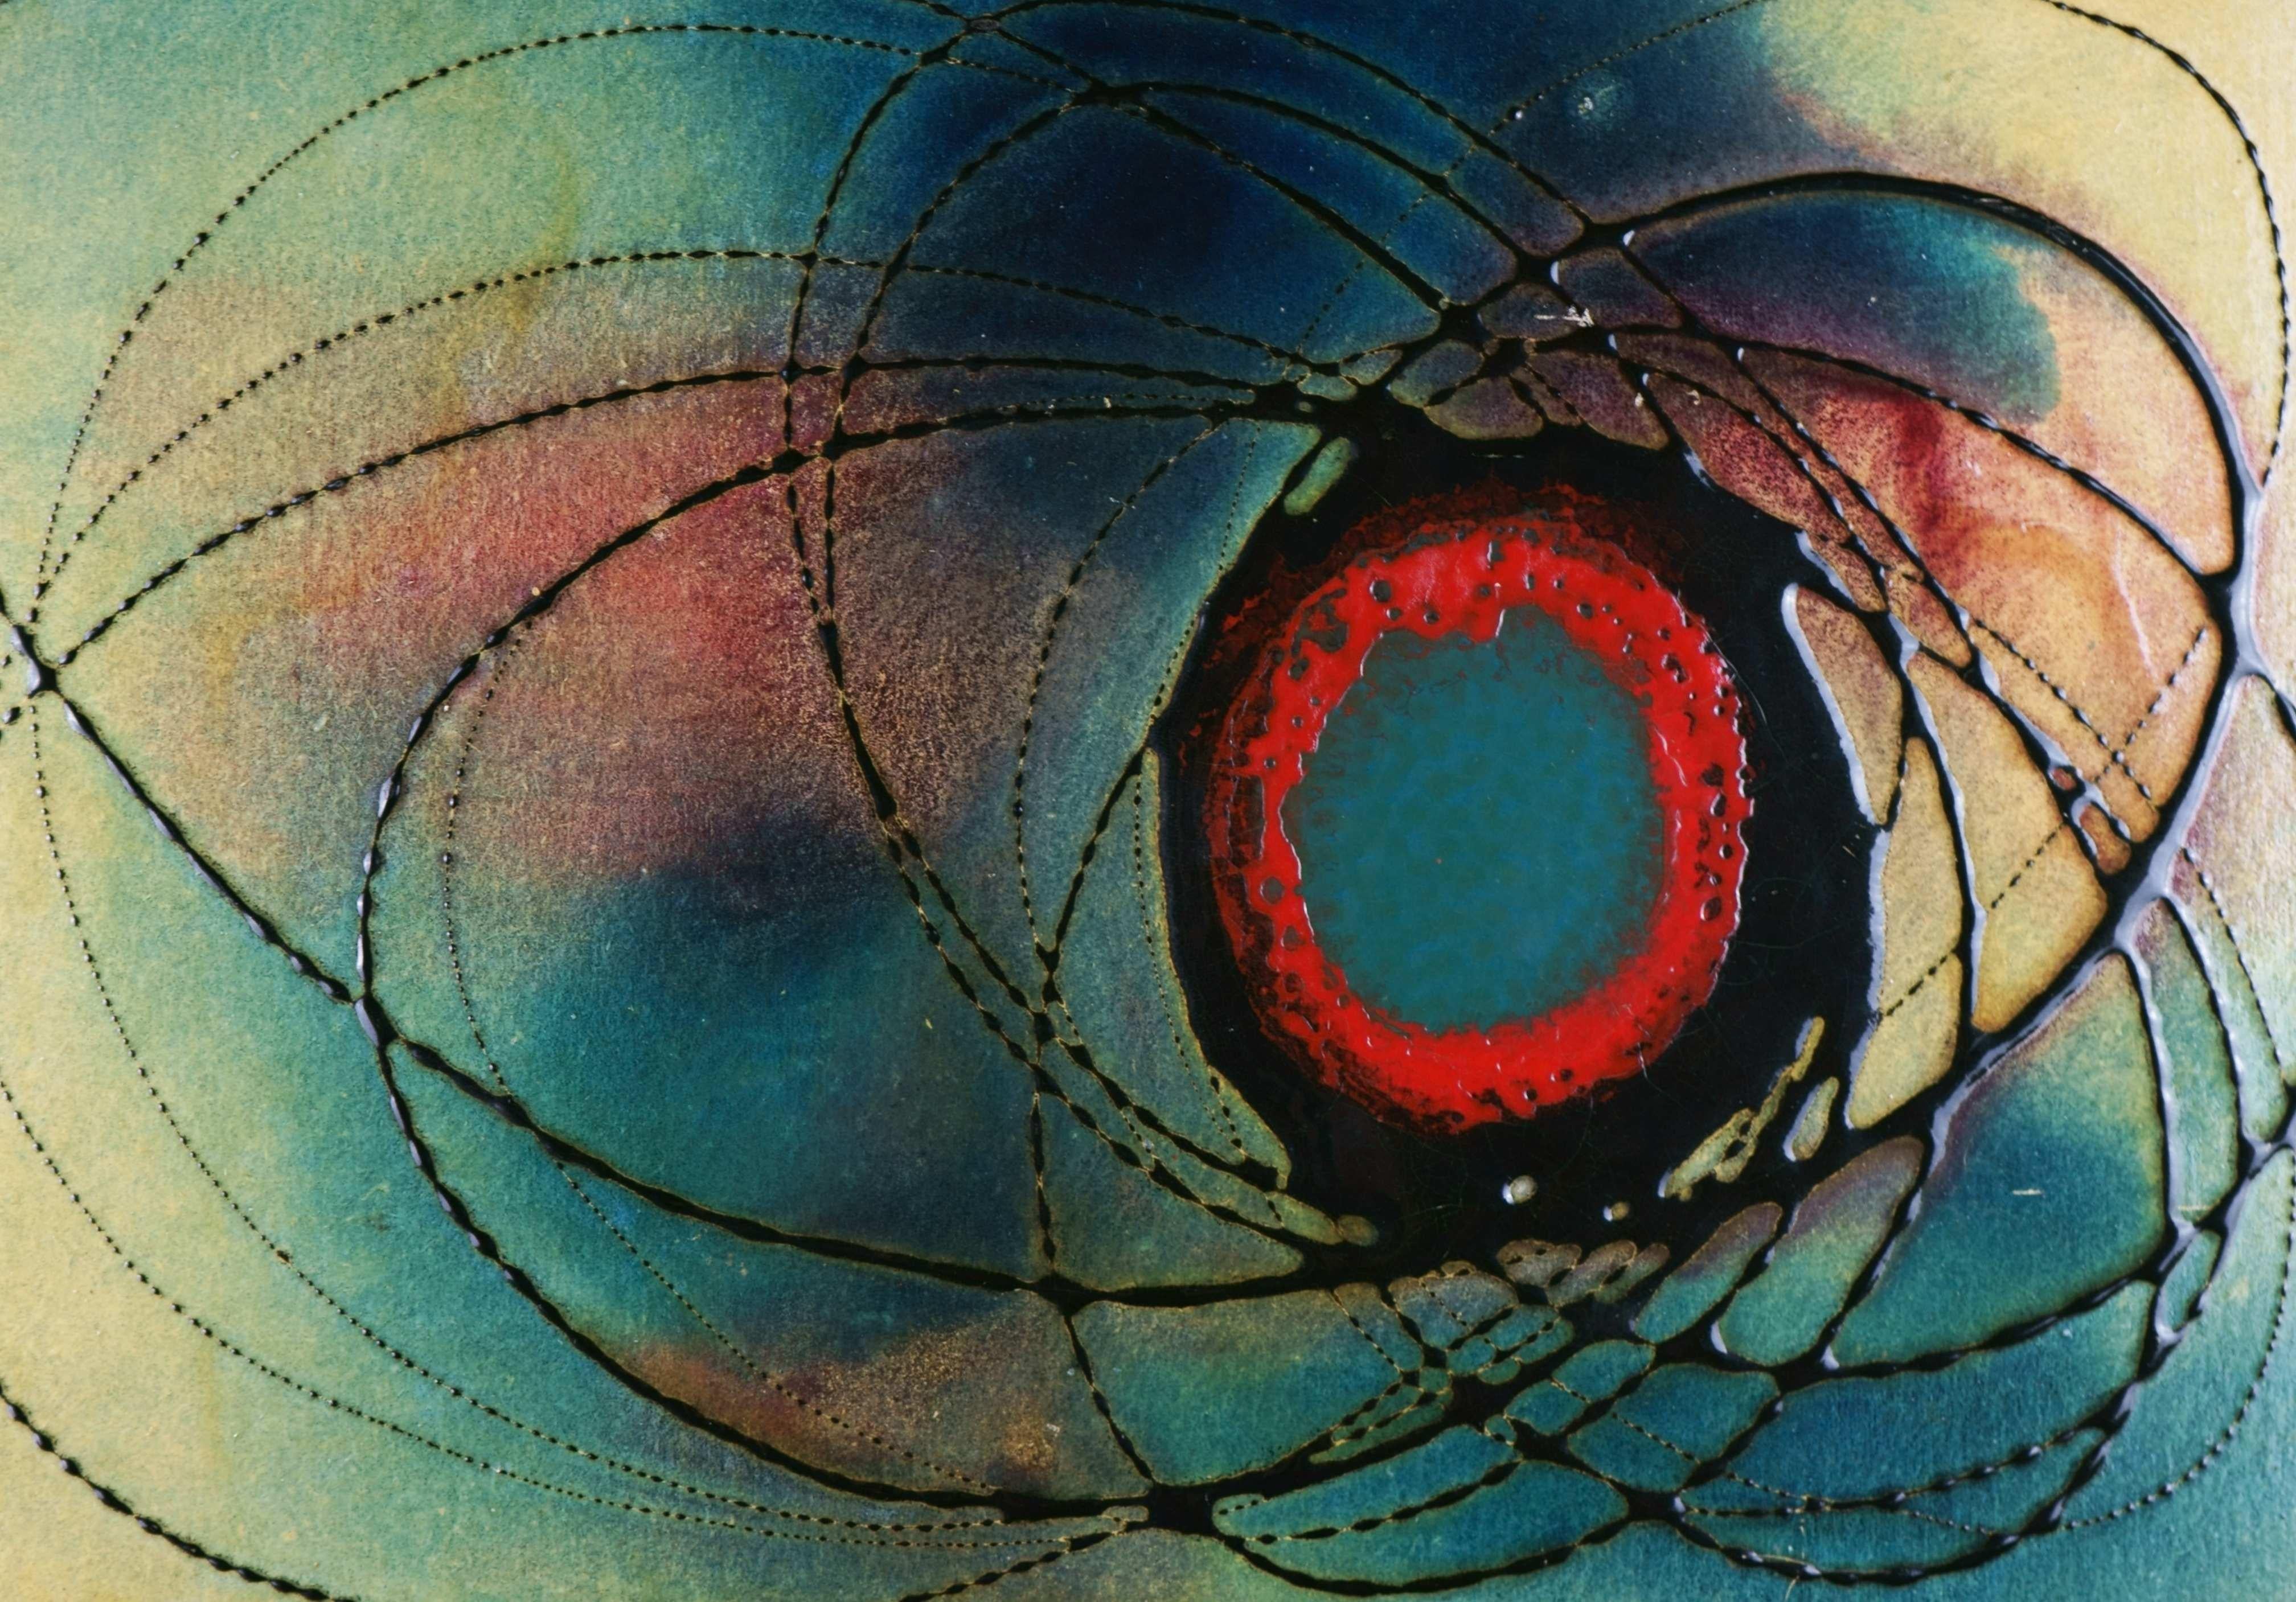 Eccentric discharges of a blue-red core / - Energetic traces - - Painting by Klaus Oldenburg